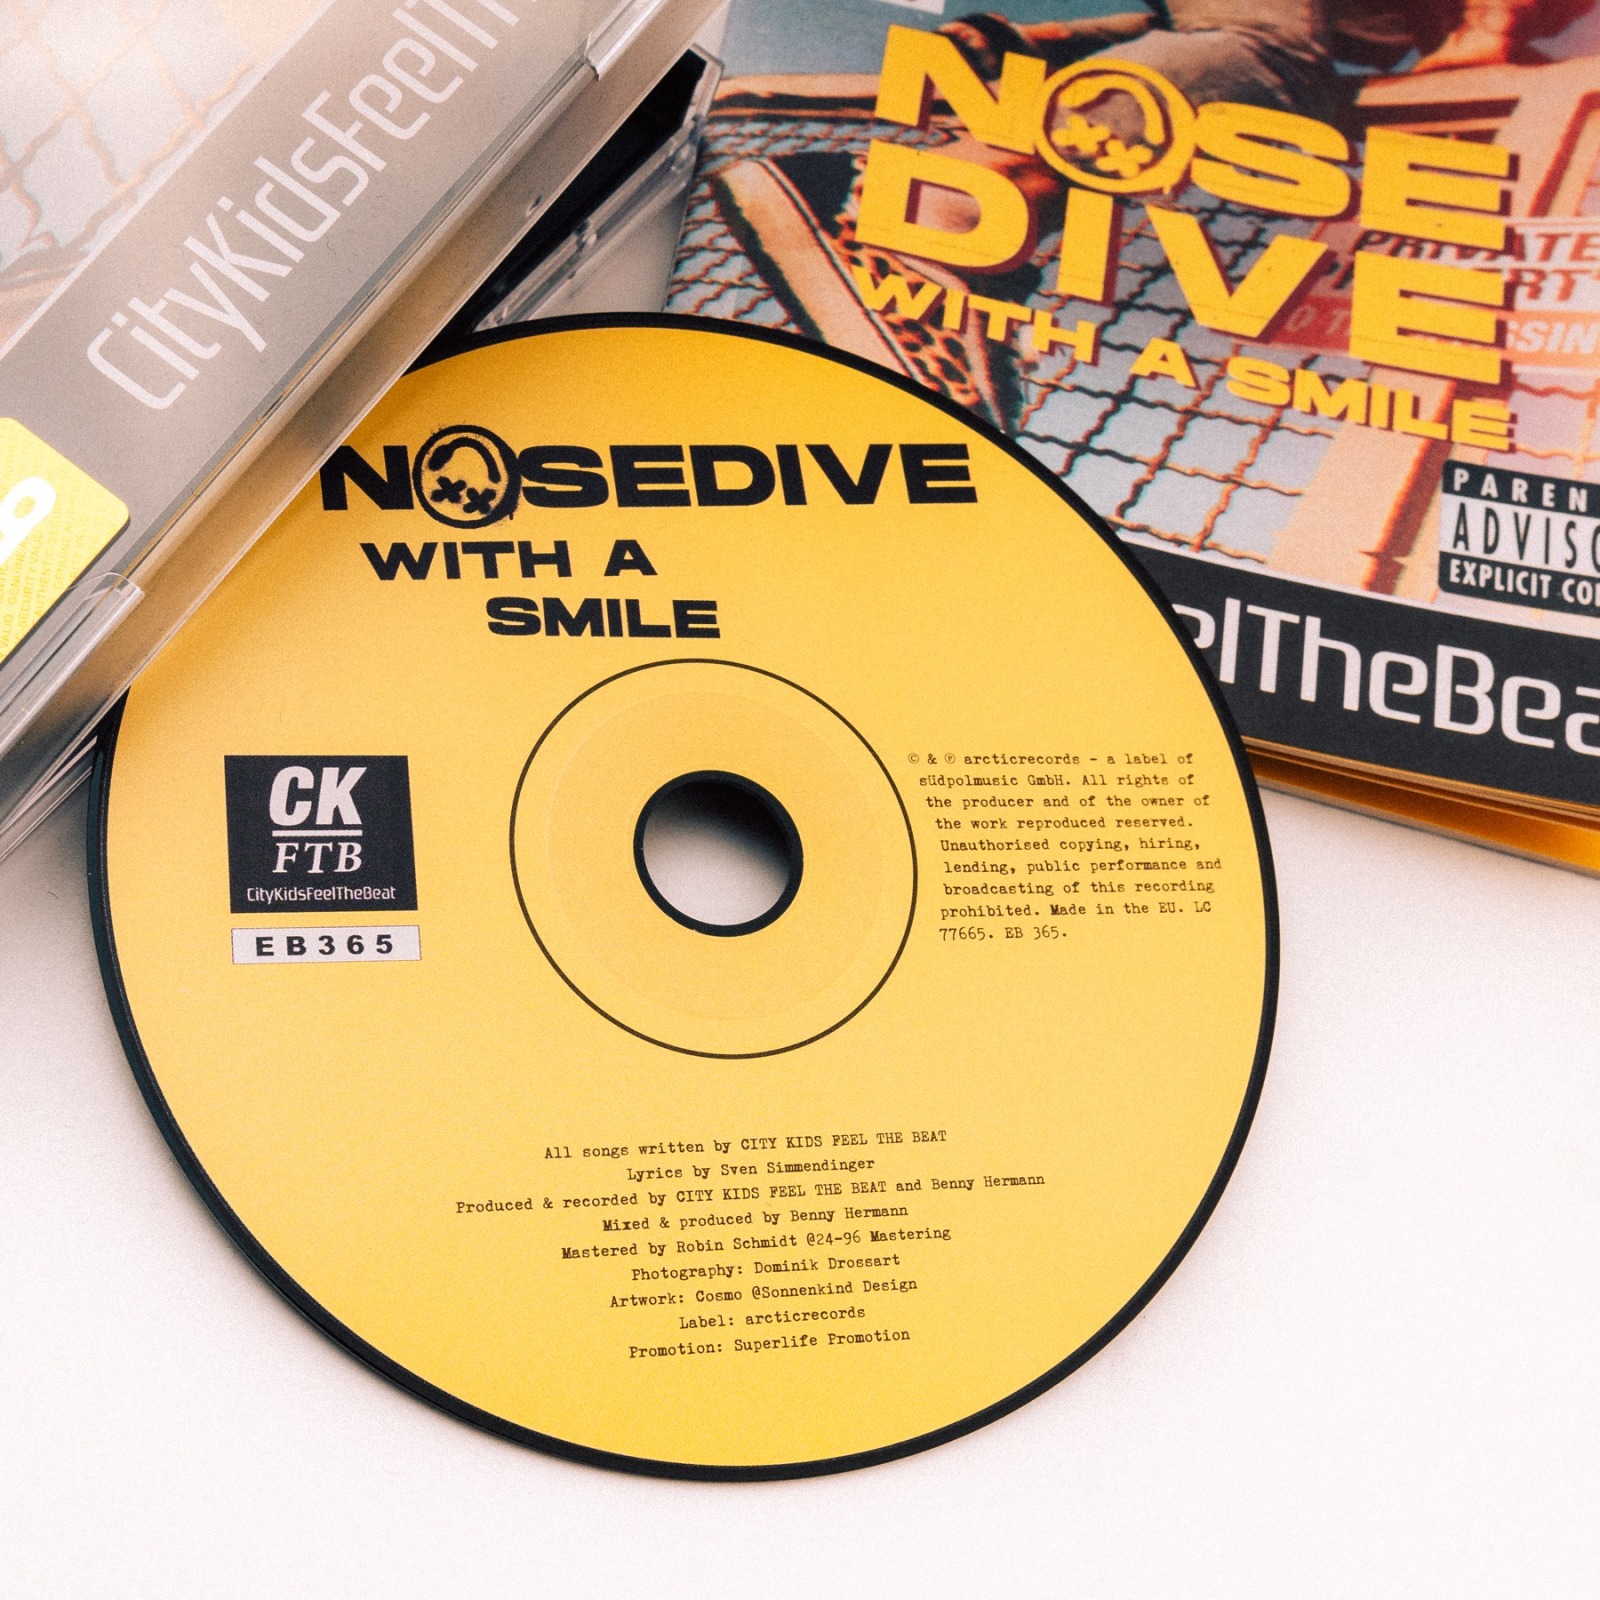 CD - Nosedive With a Smile - Playstation Edition 3